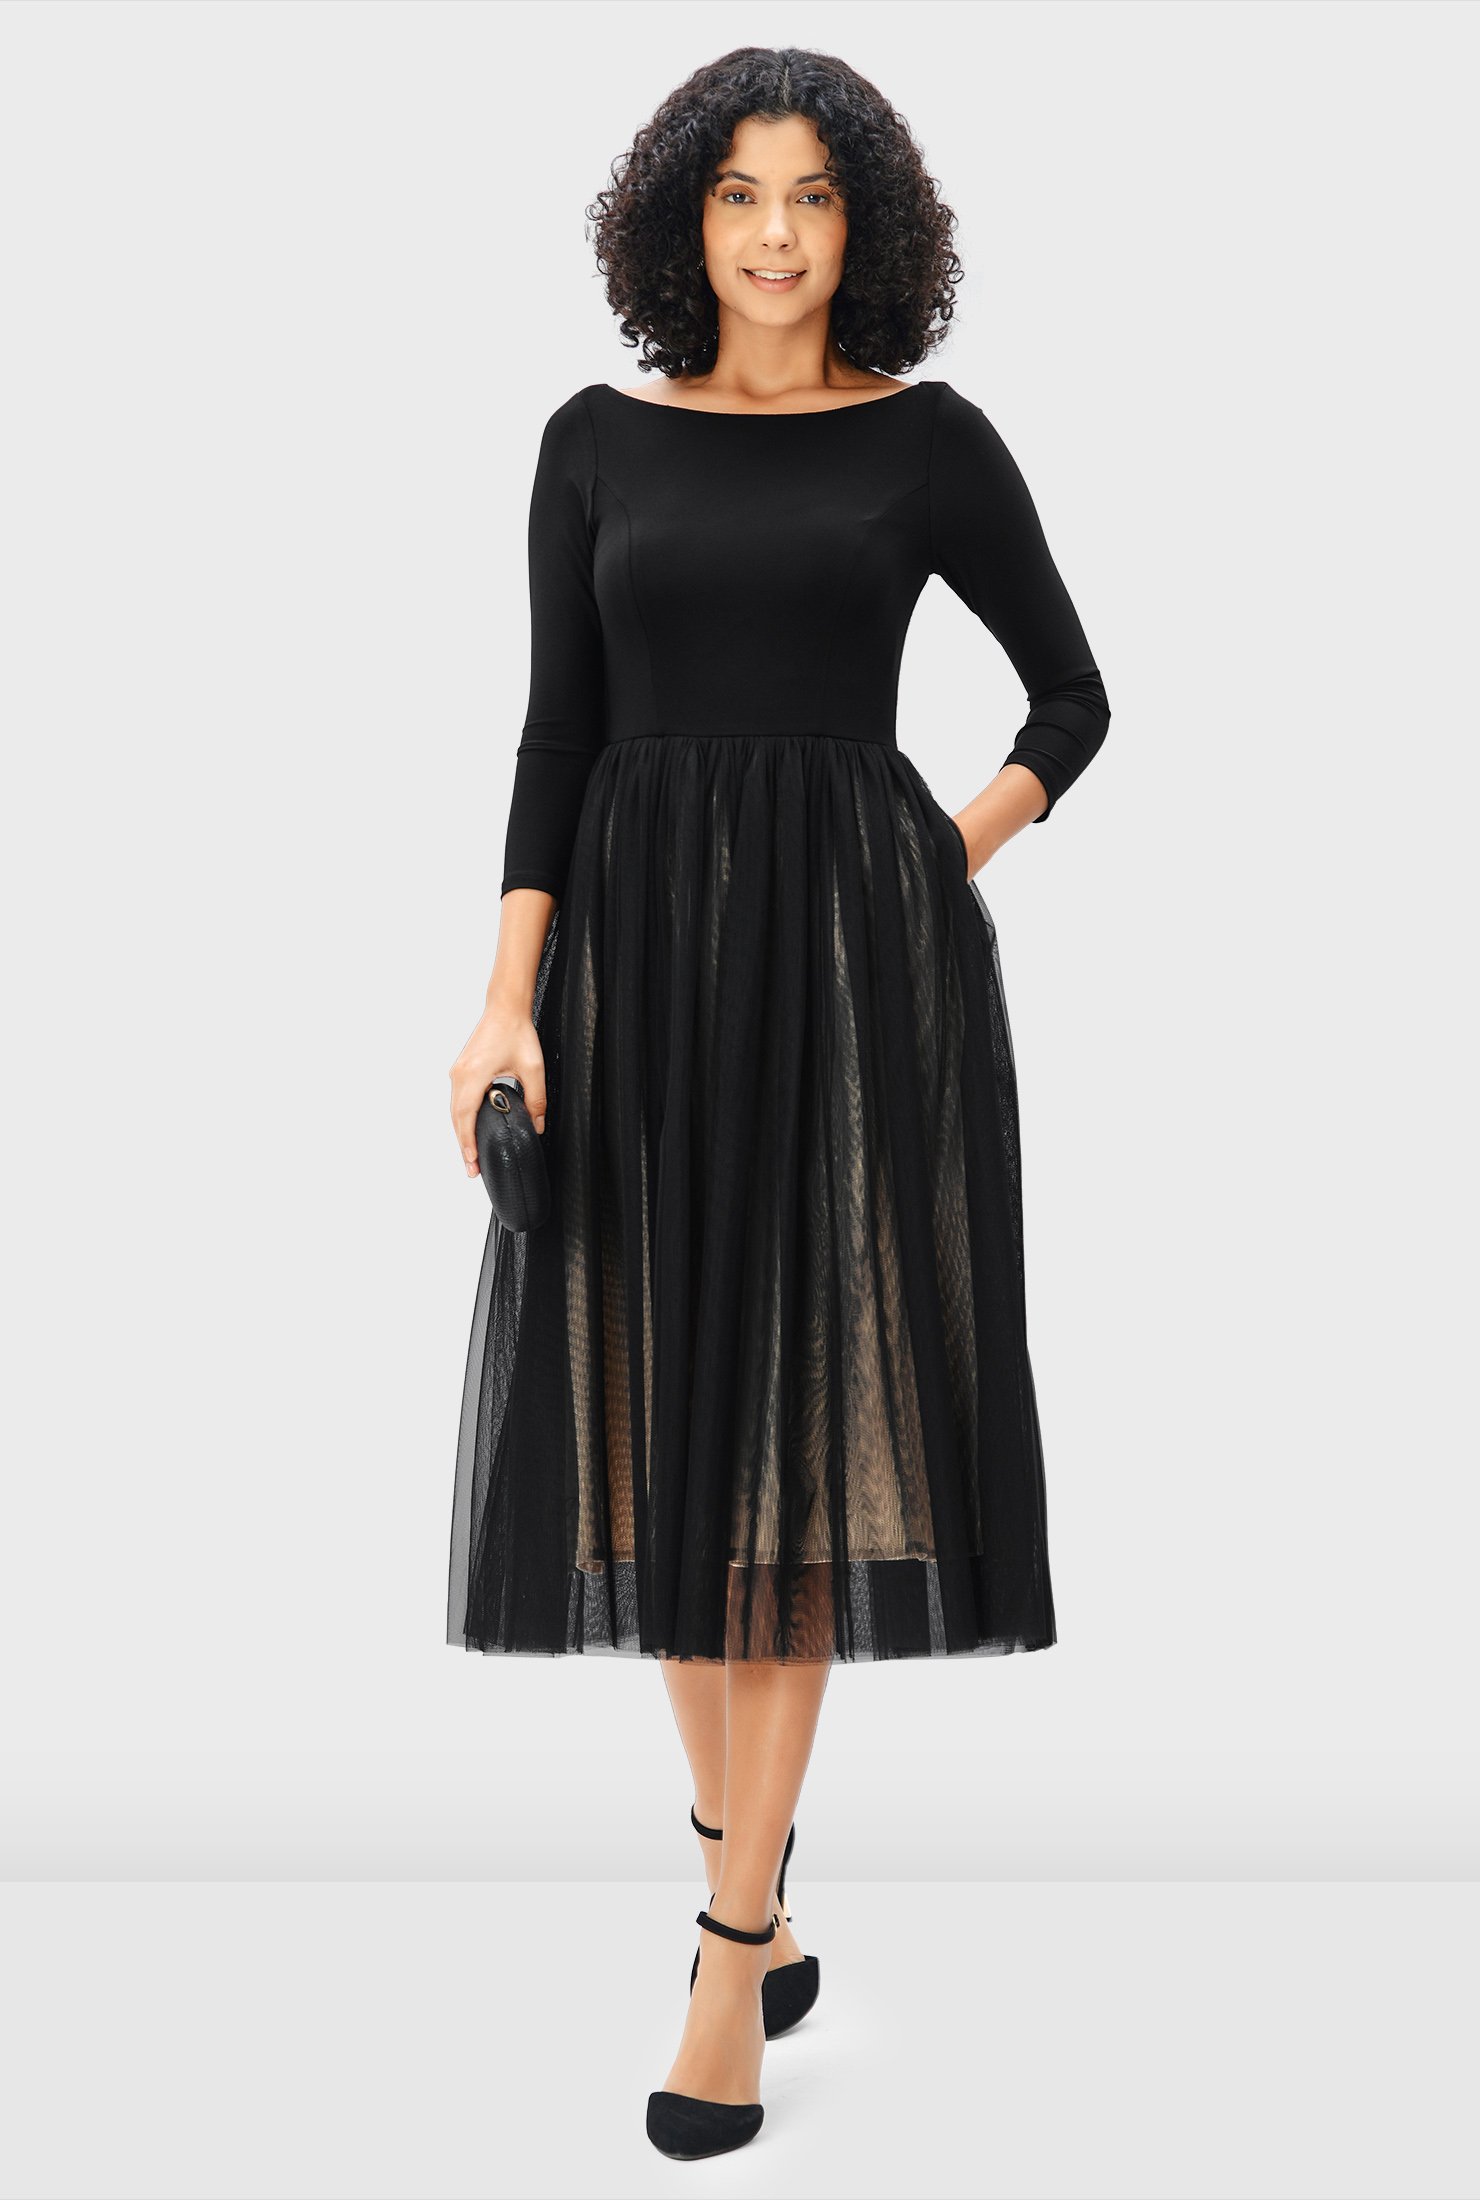 Shop Jersey knit and layered tulle fit-and-flare dress | eShakti